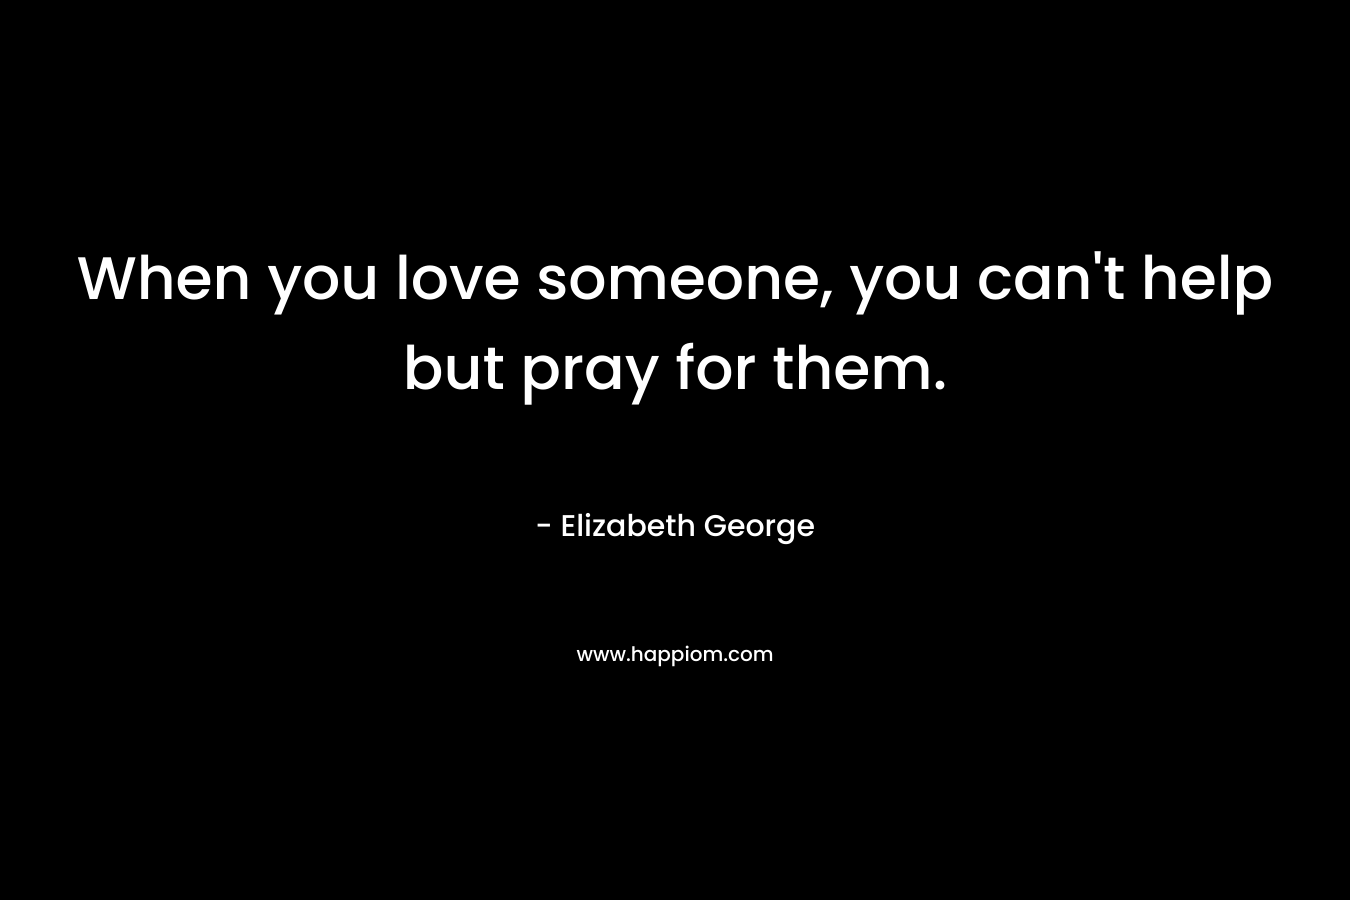 When you love someone, you can't help but pray for them.